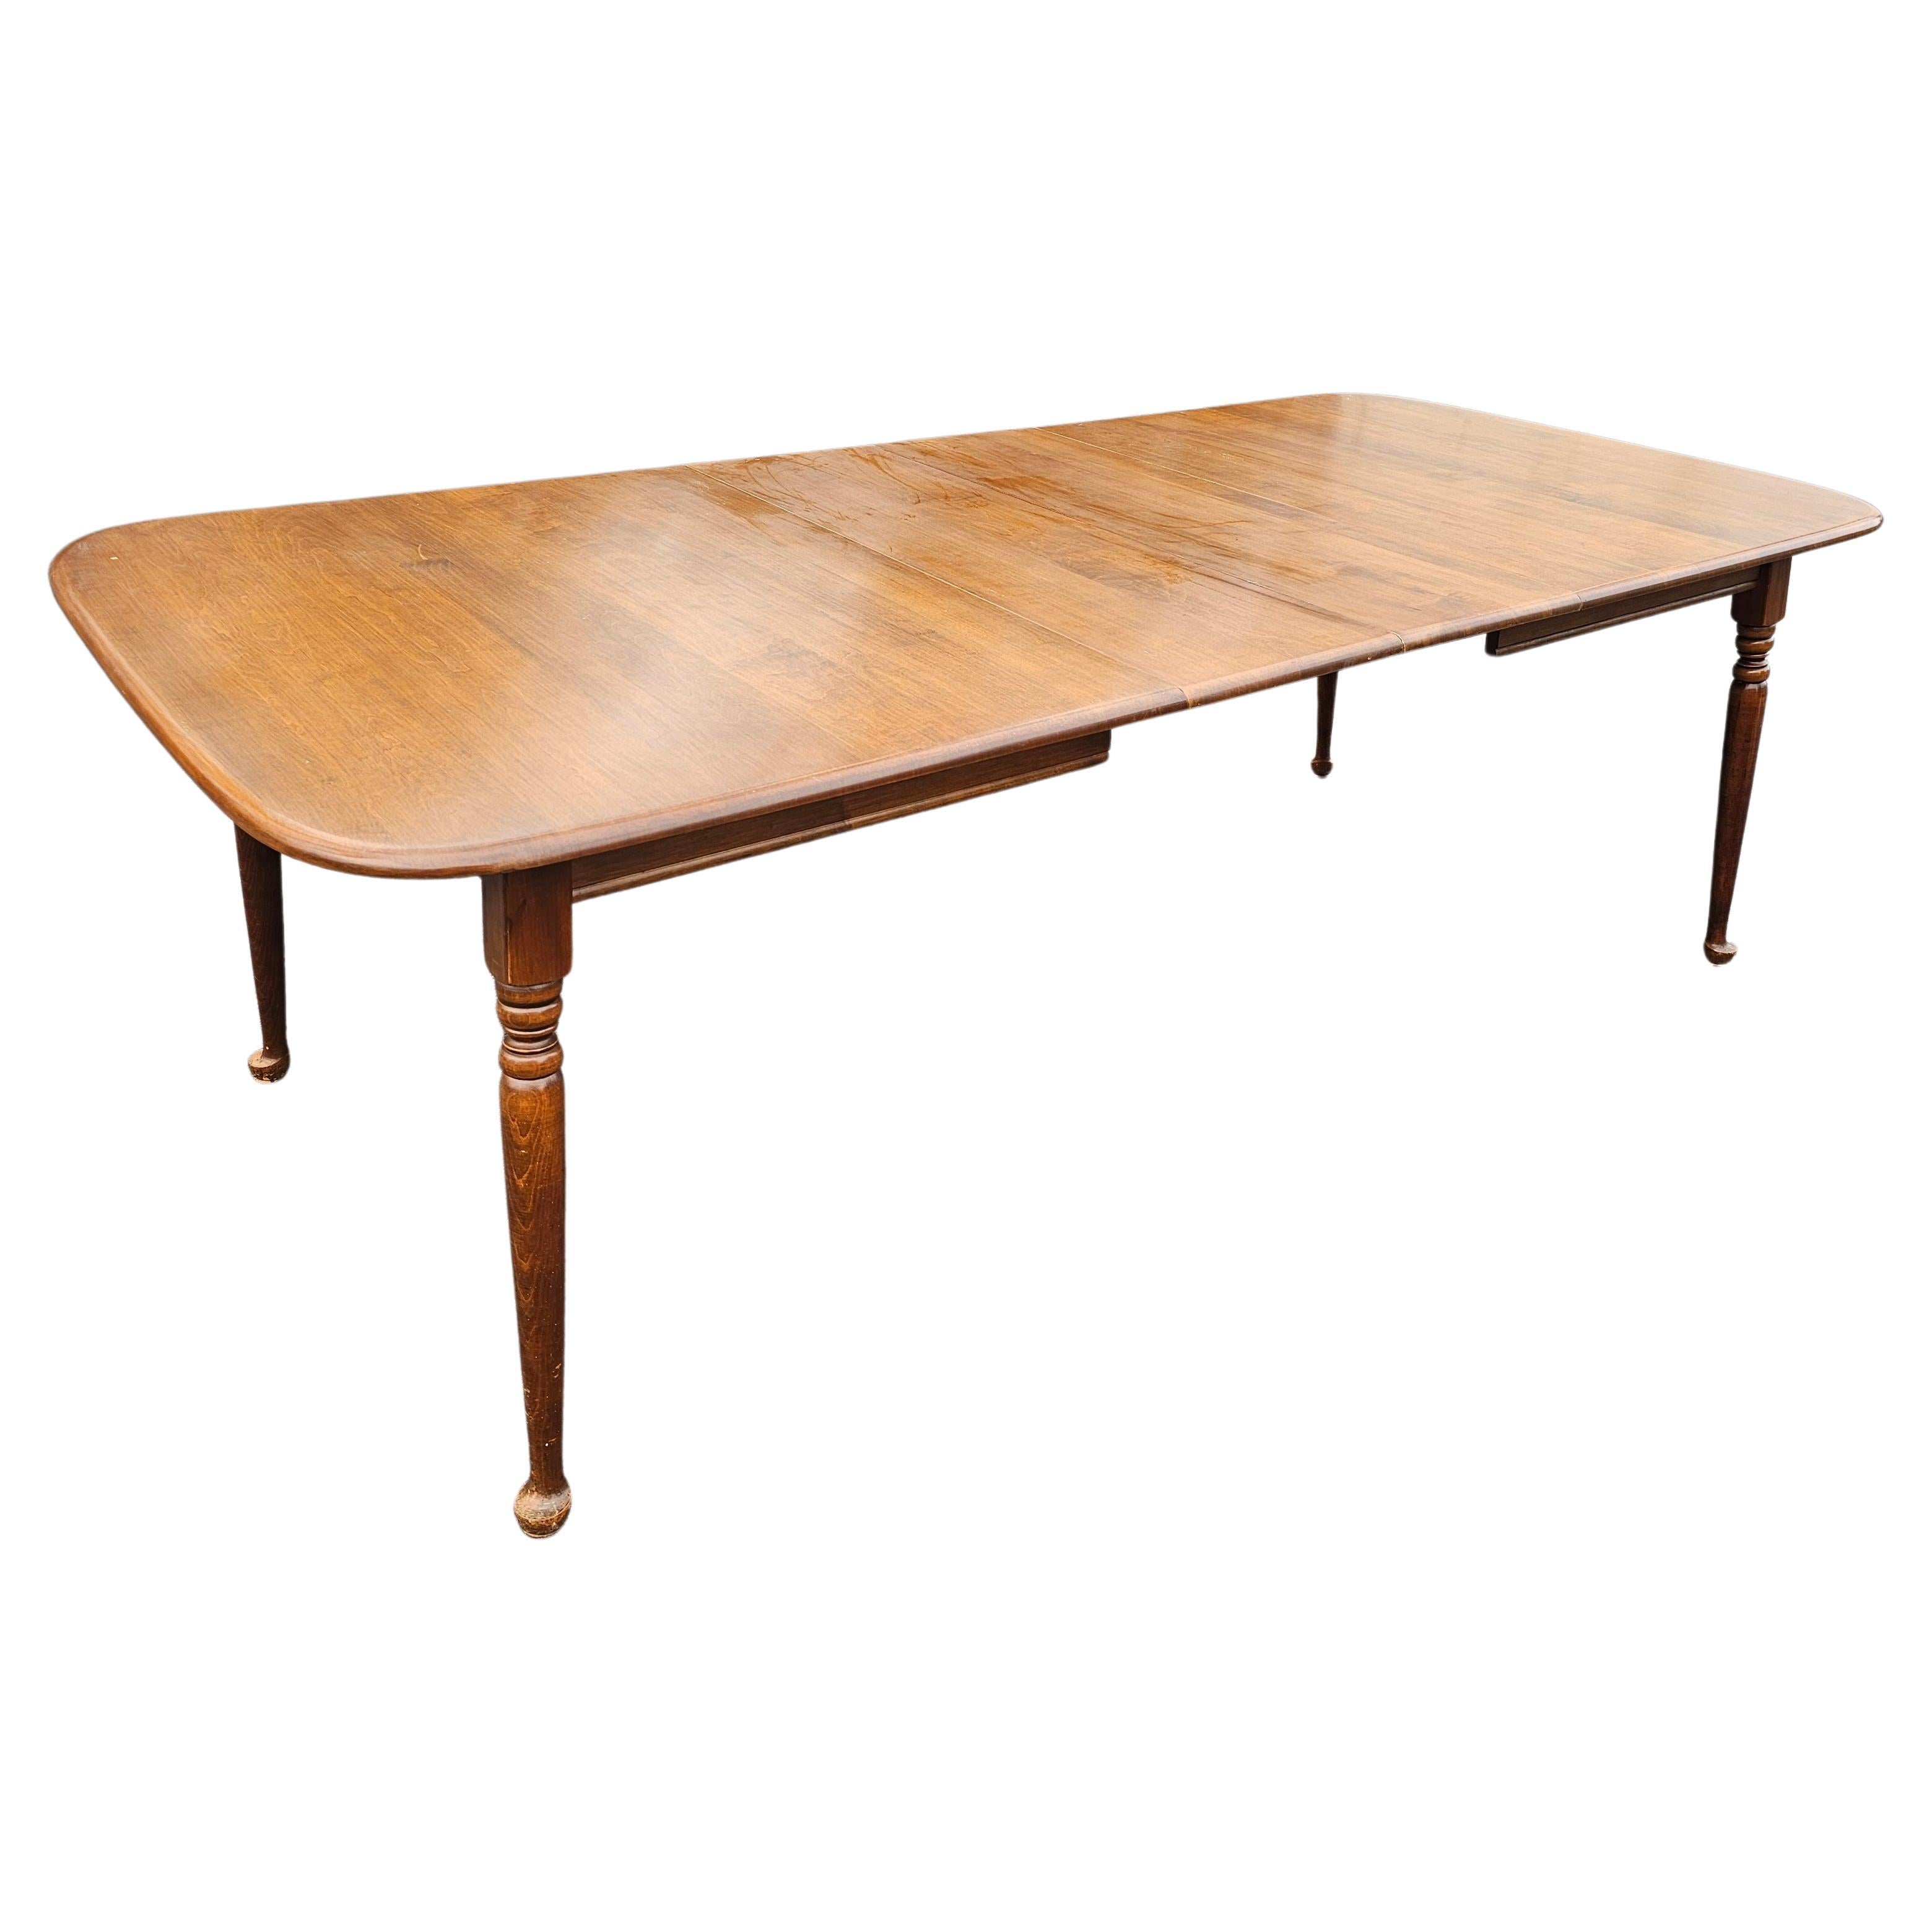 American Colonial Heywood Wakefield Maple Cinnamon Colonial Style Extension Dining Table For Sale